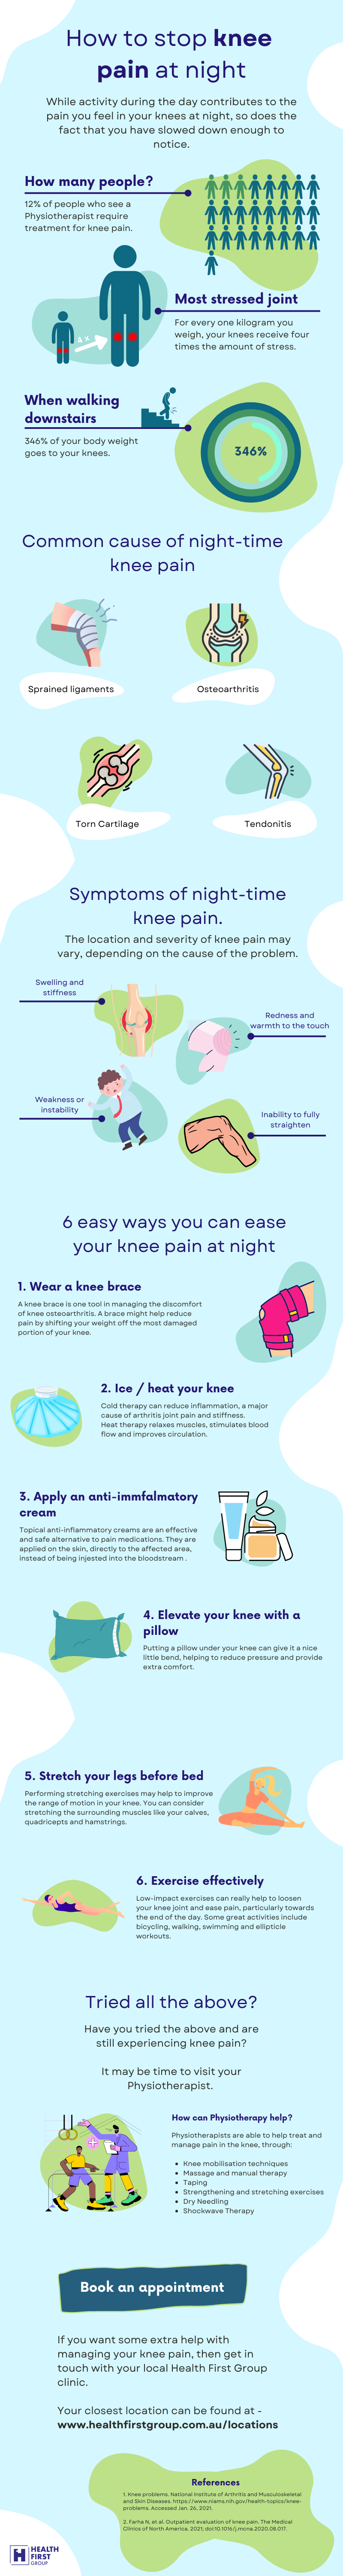 Infographic of knee pain advice 3/3